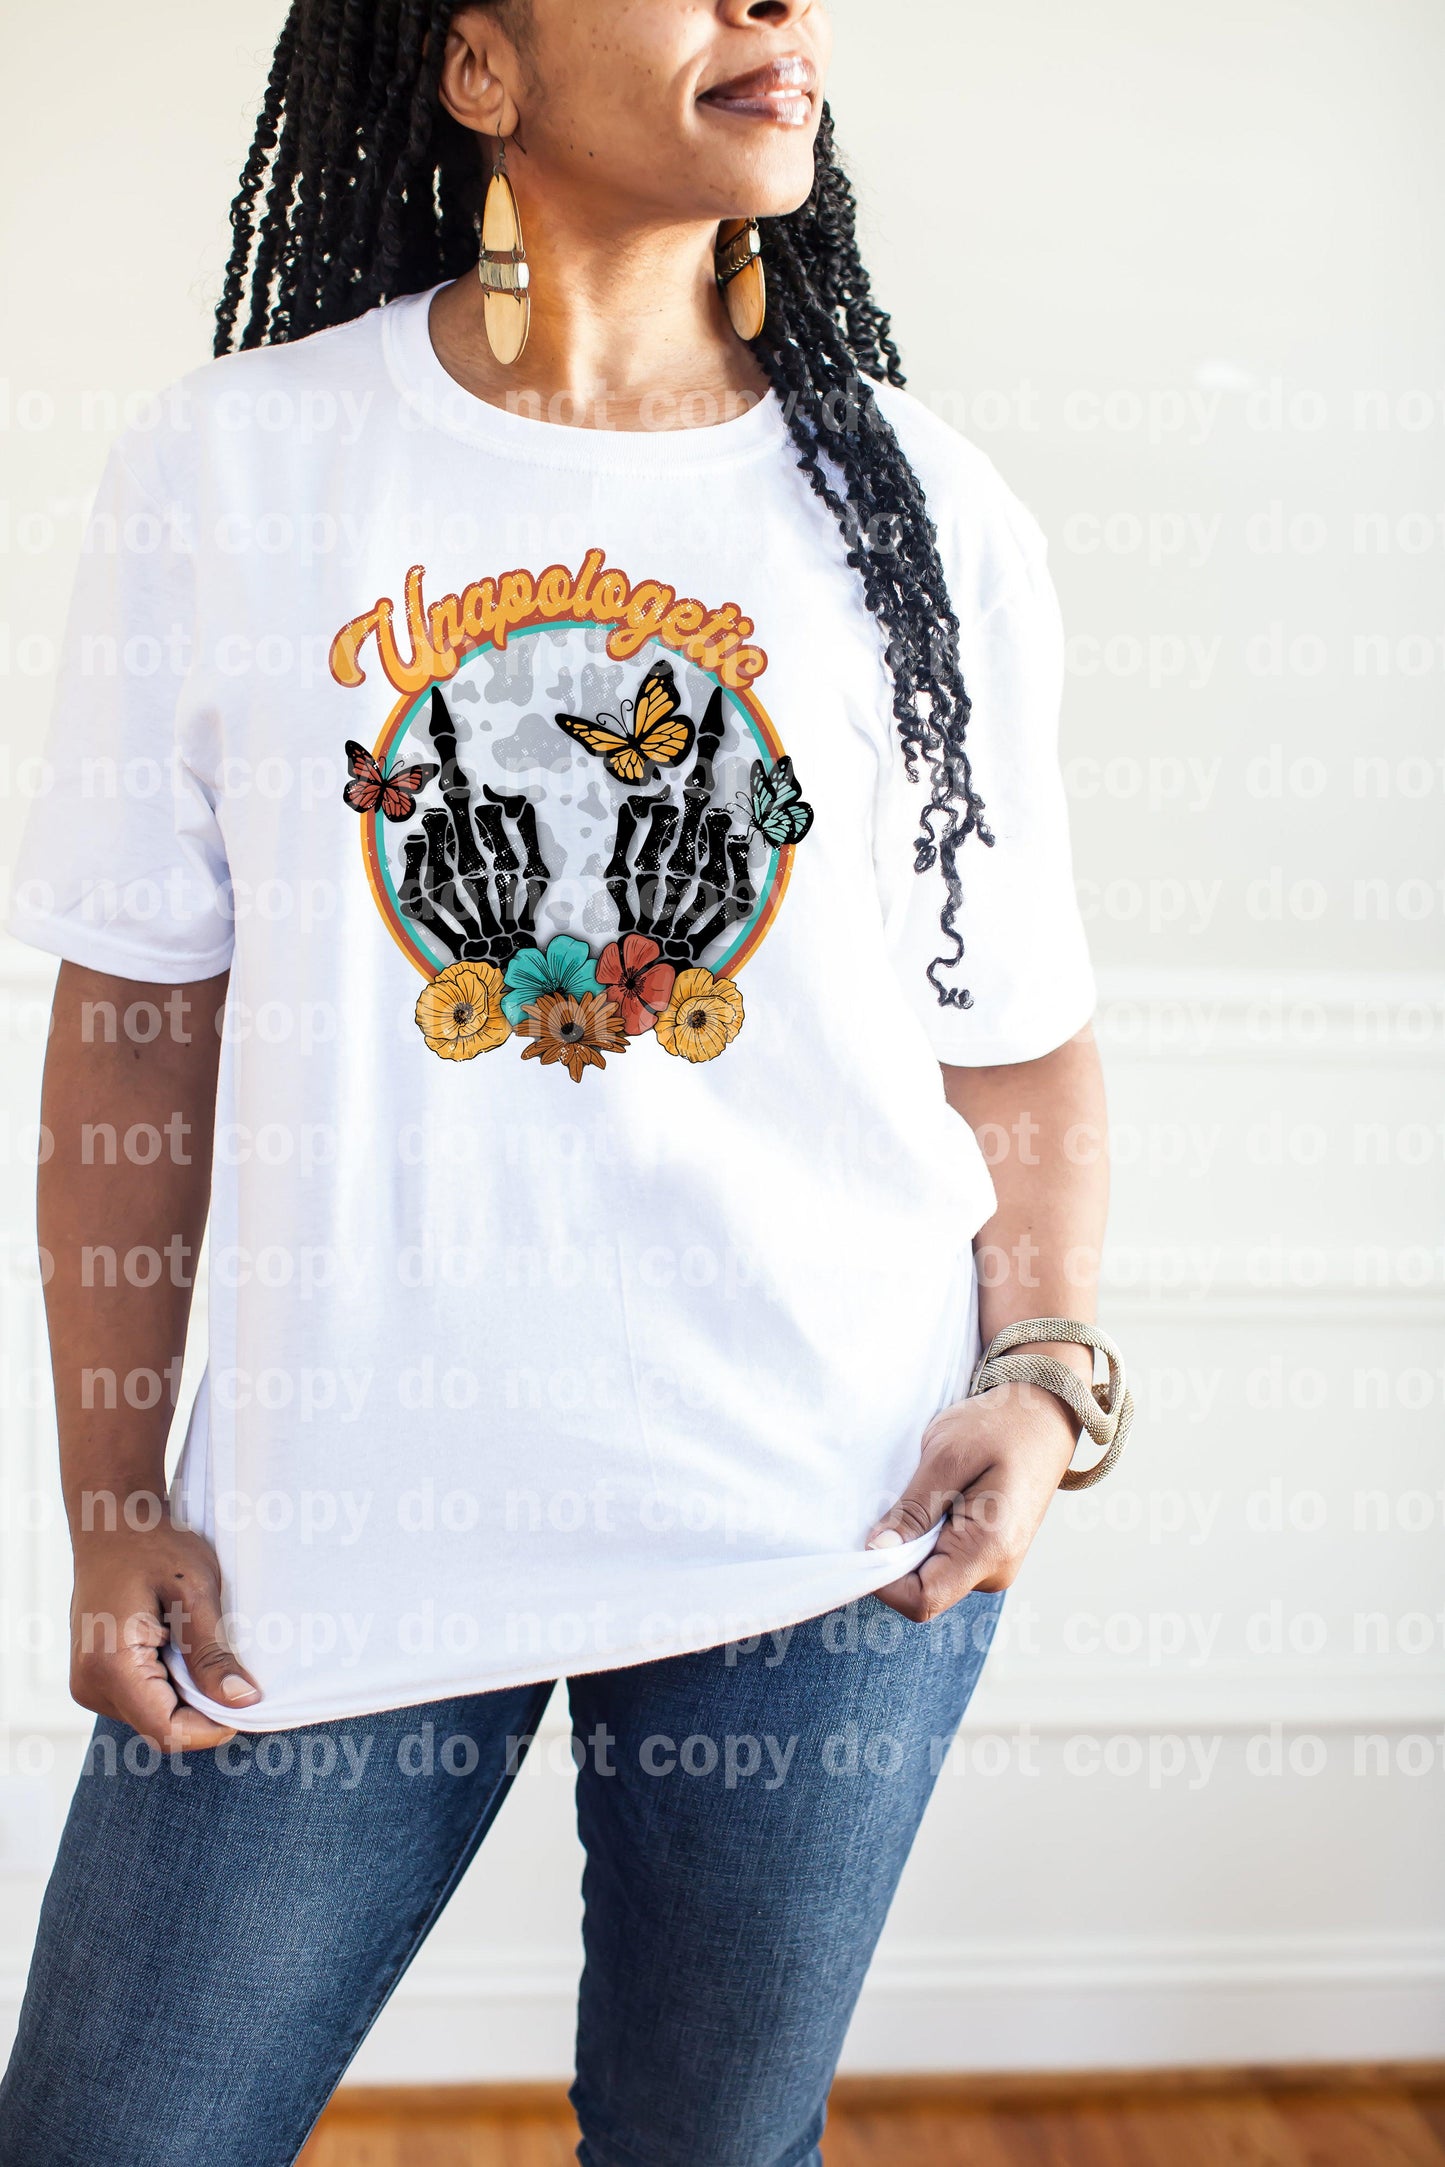 Middle Finger Floral Unapologetic Dream Print or Sublimation Print